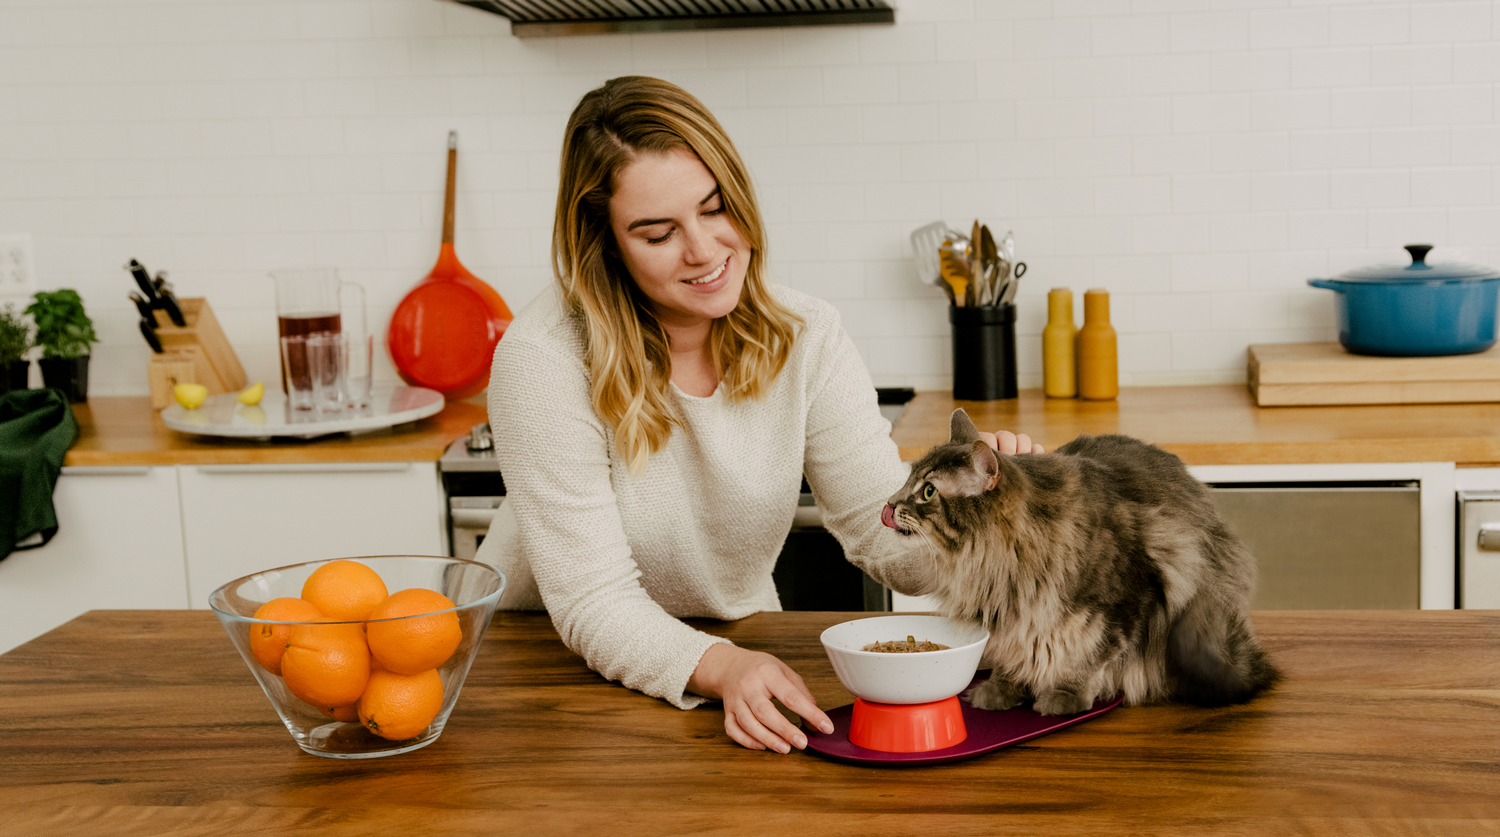 Image of woman smiling and petting longhaired cat. Cat is eating Cat Person food out of a Mesa Bowl and licking its chops.